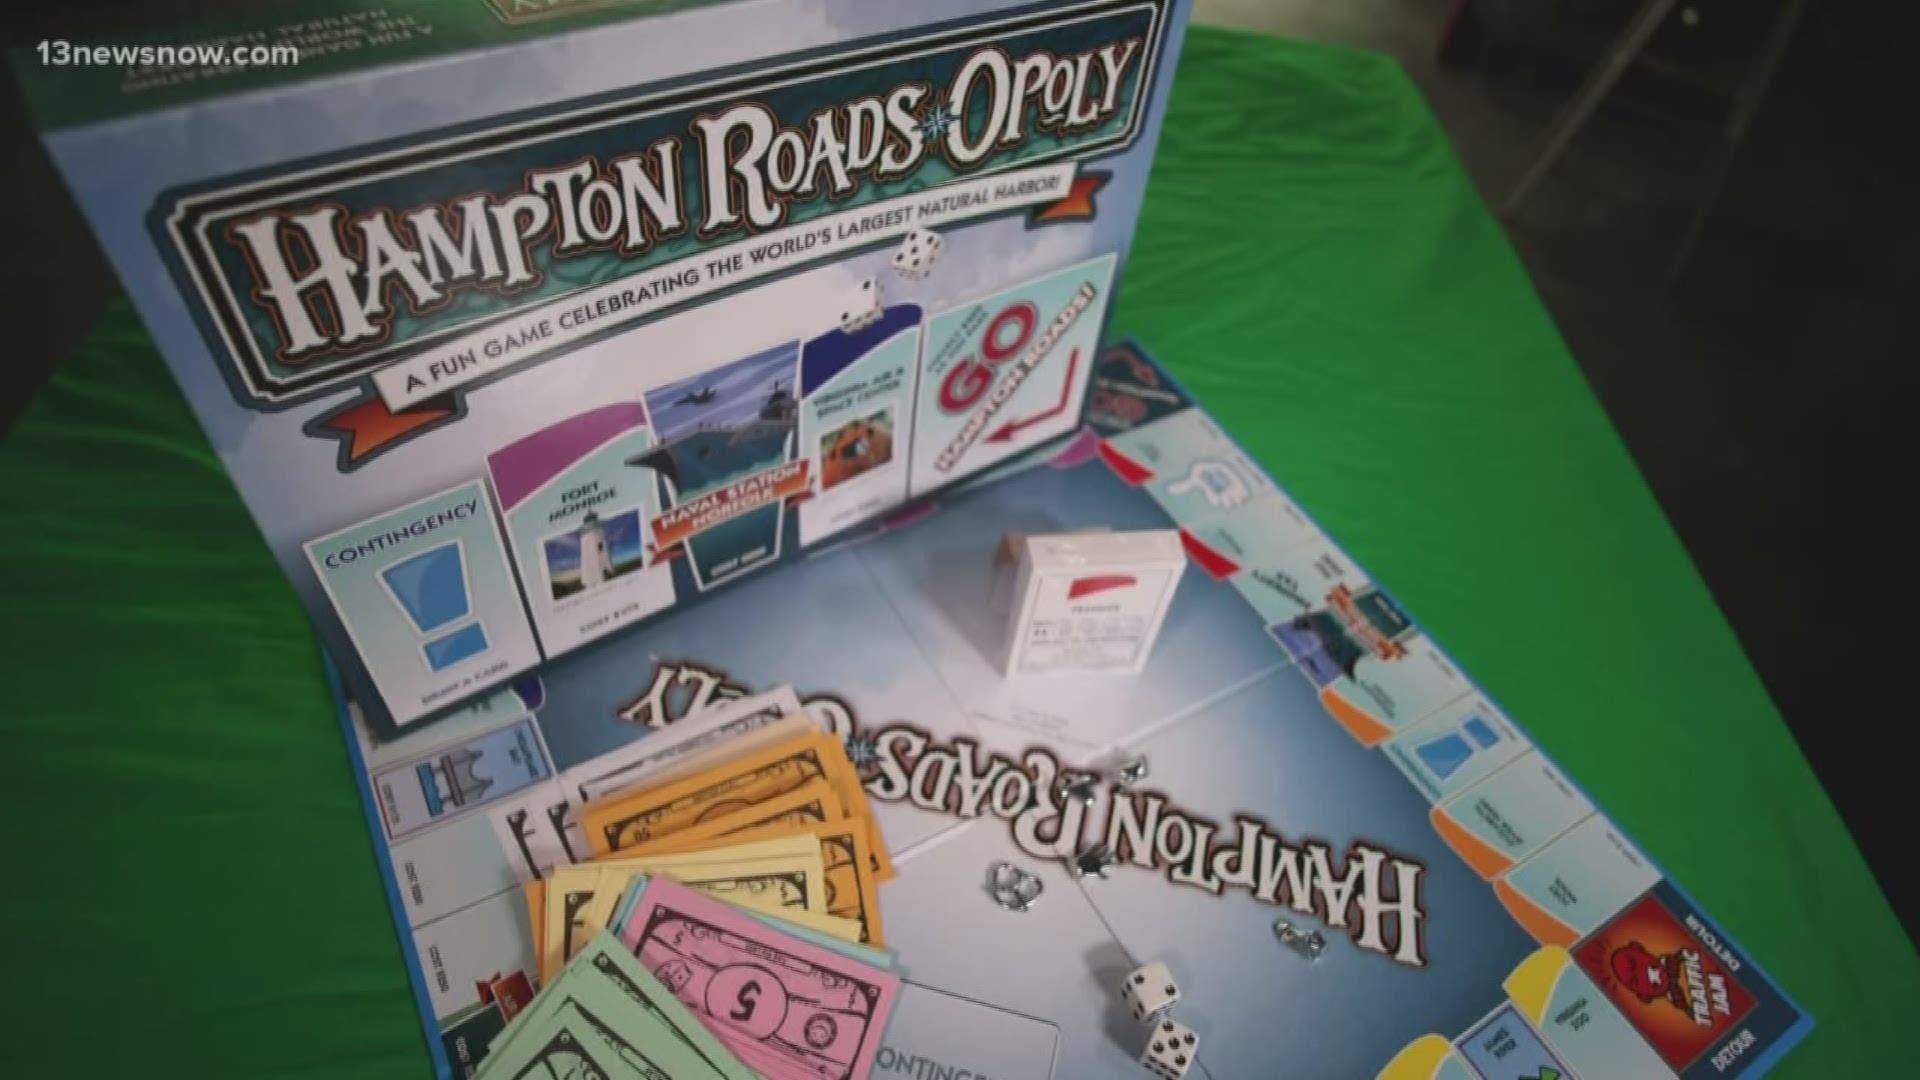 There's a Hampton Roads inspired version of Monopoly. The game is called Hampton Roads-Opoly and it features local real estate like the Chrysler Museum of Art and Busch Gardens. Instead of going to jail though, users get stuck in a traffic jam.